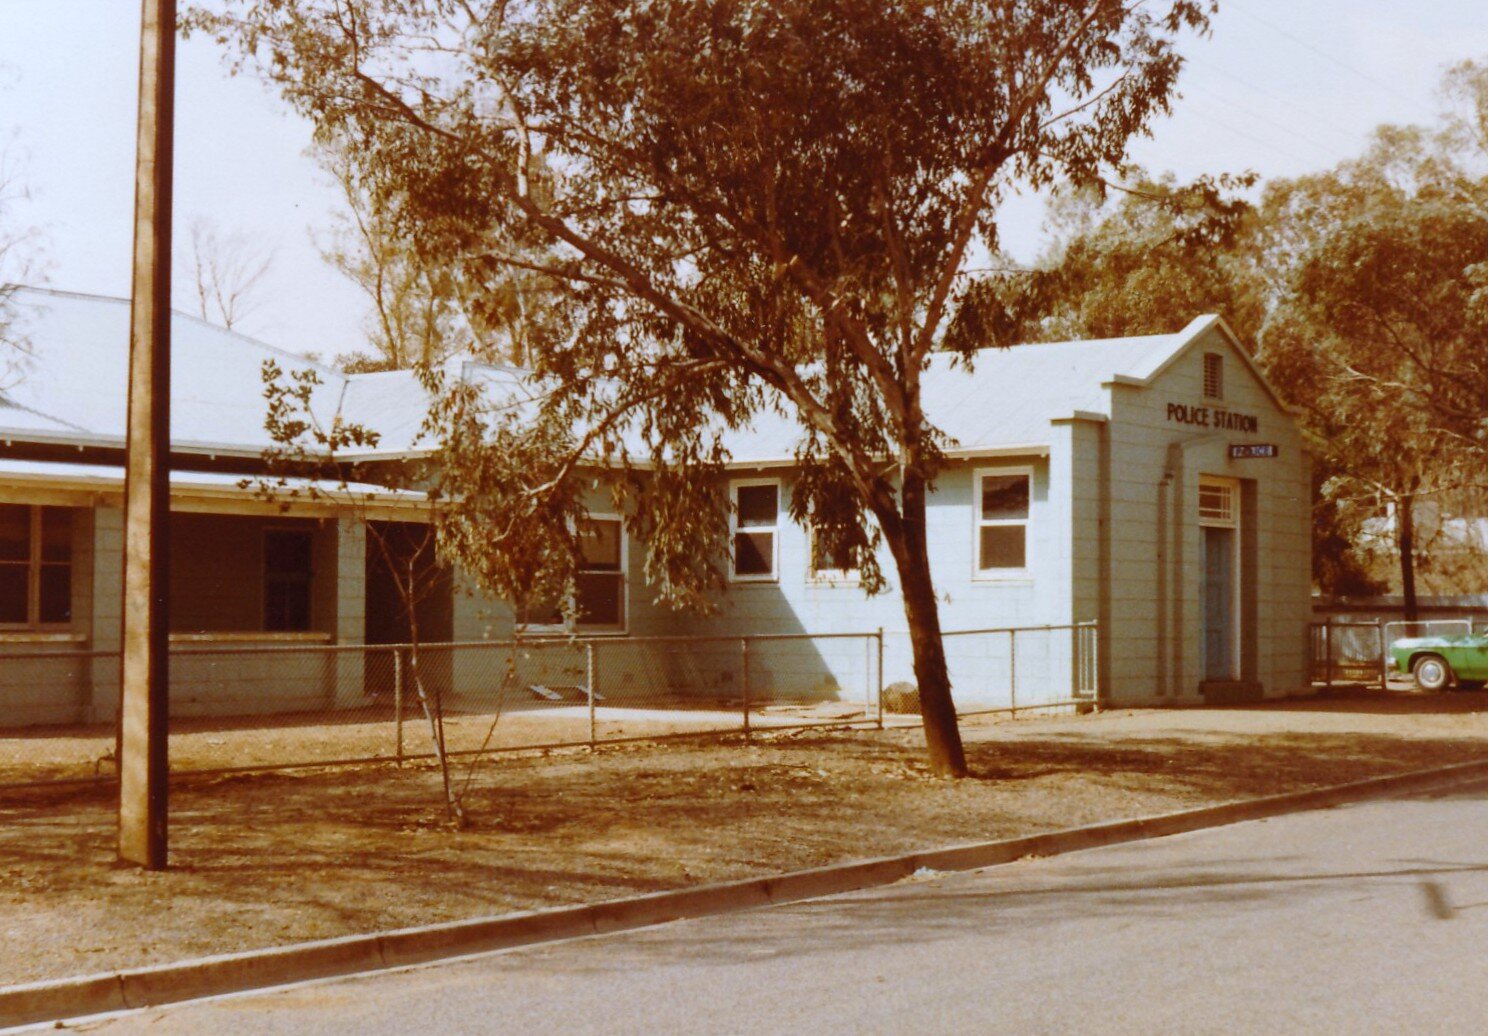  Police Station - September 1982 No longer in use following move of policing to the new township. Enid Blieschke Collection 